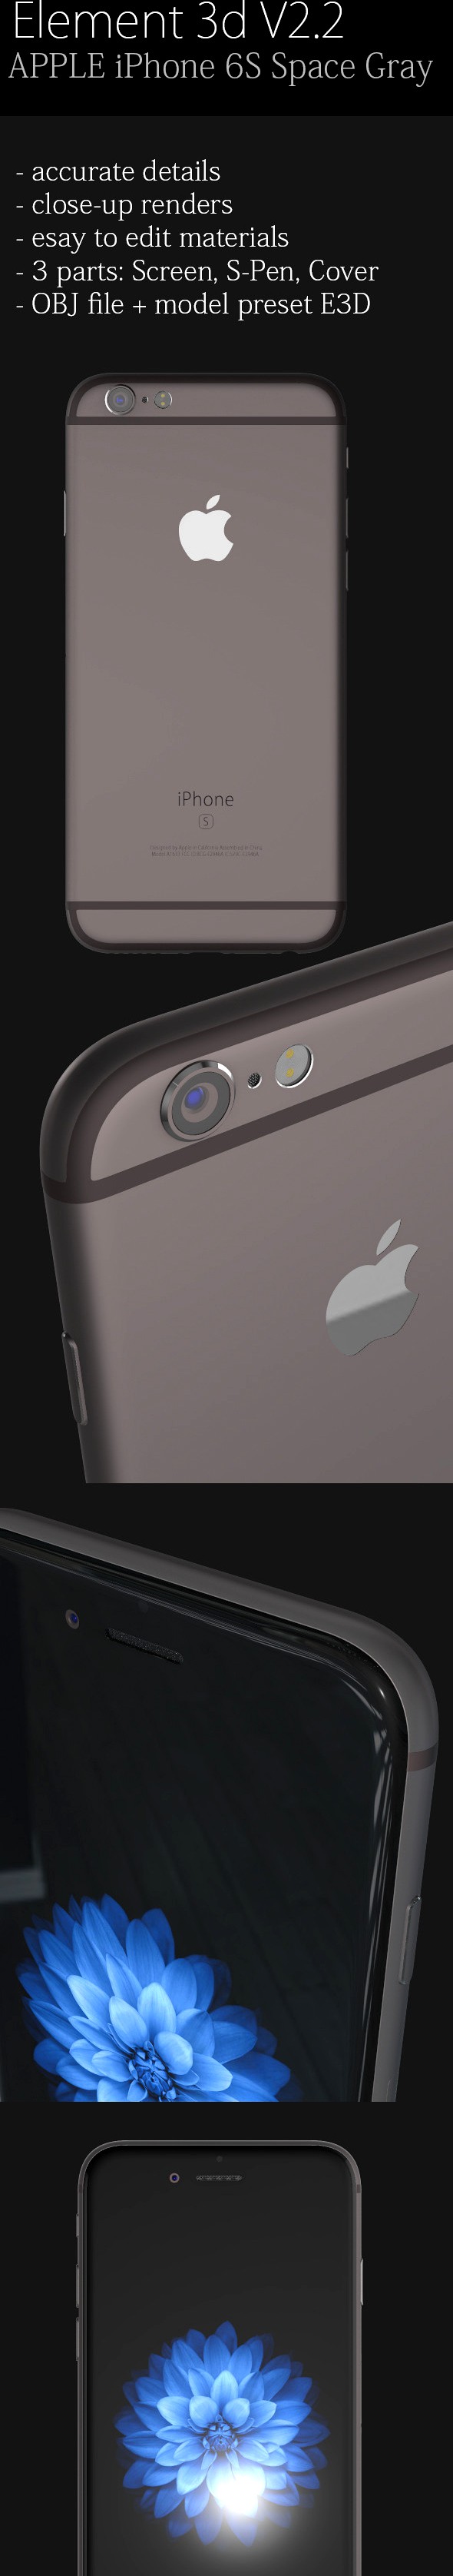 Element3D - Apple iPhone 6S Space Gray